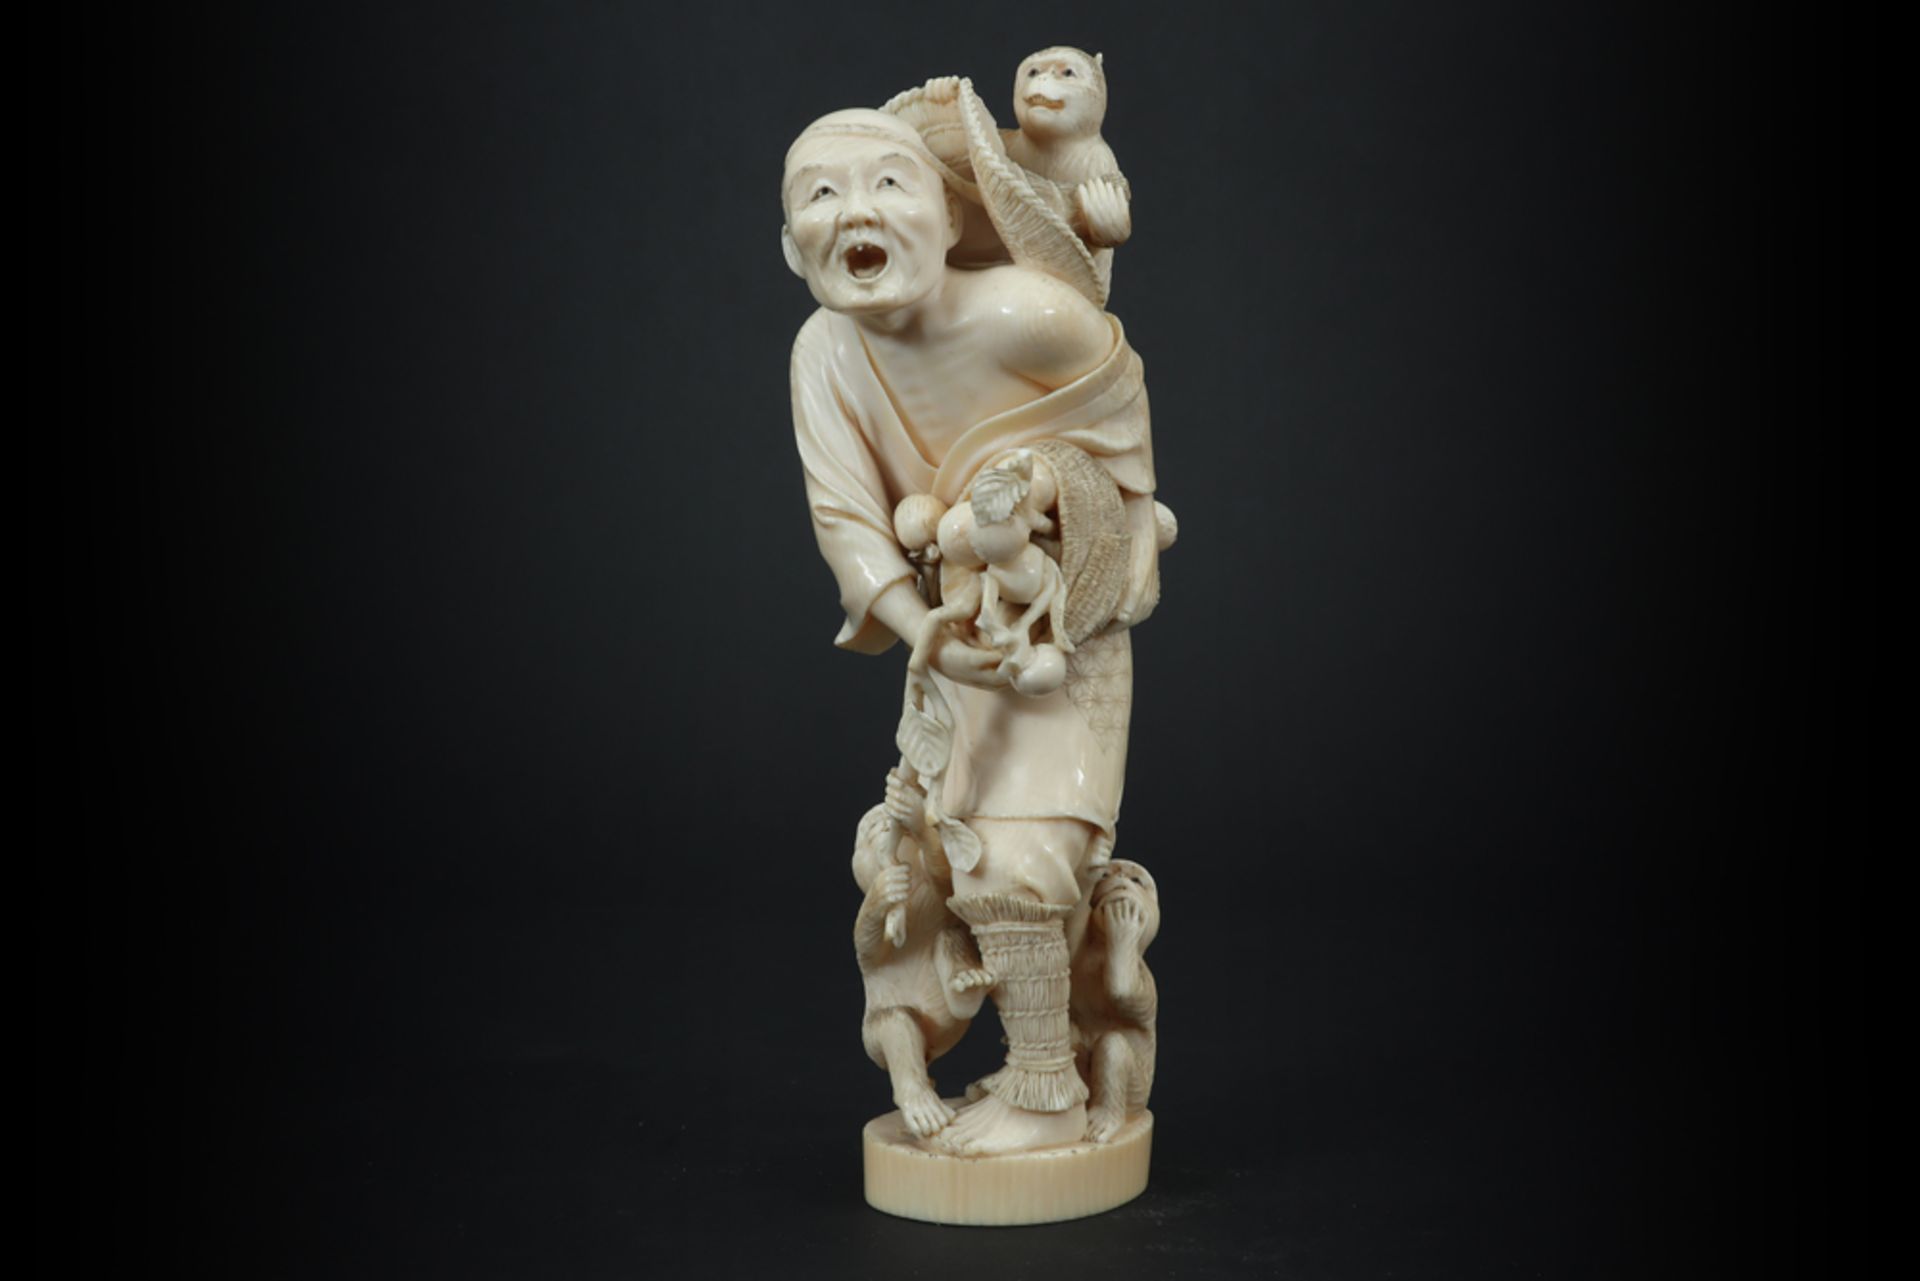 19th Cent. Japanese "Farmer with monkeys" sculpture in marked ivory - with EU CITES certification ||